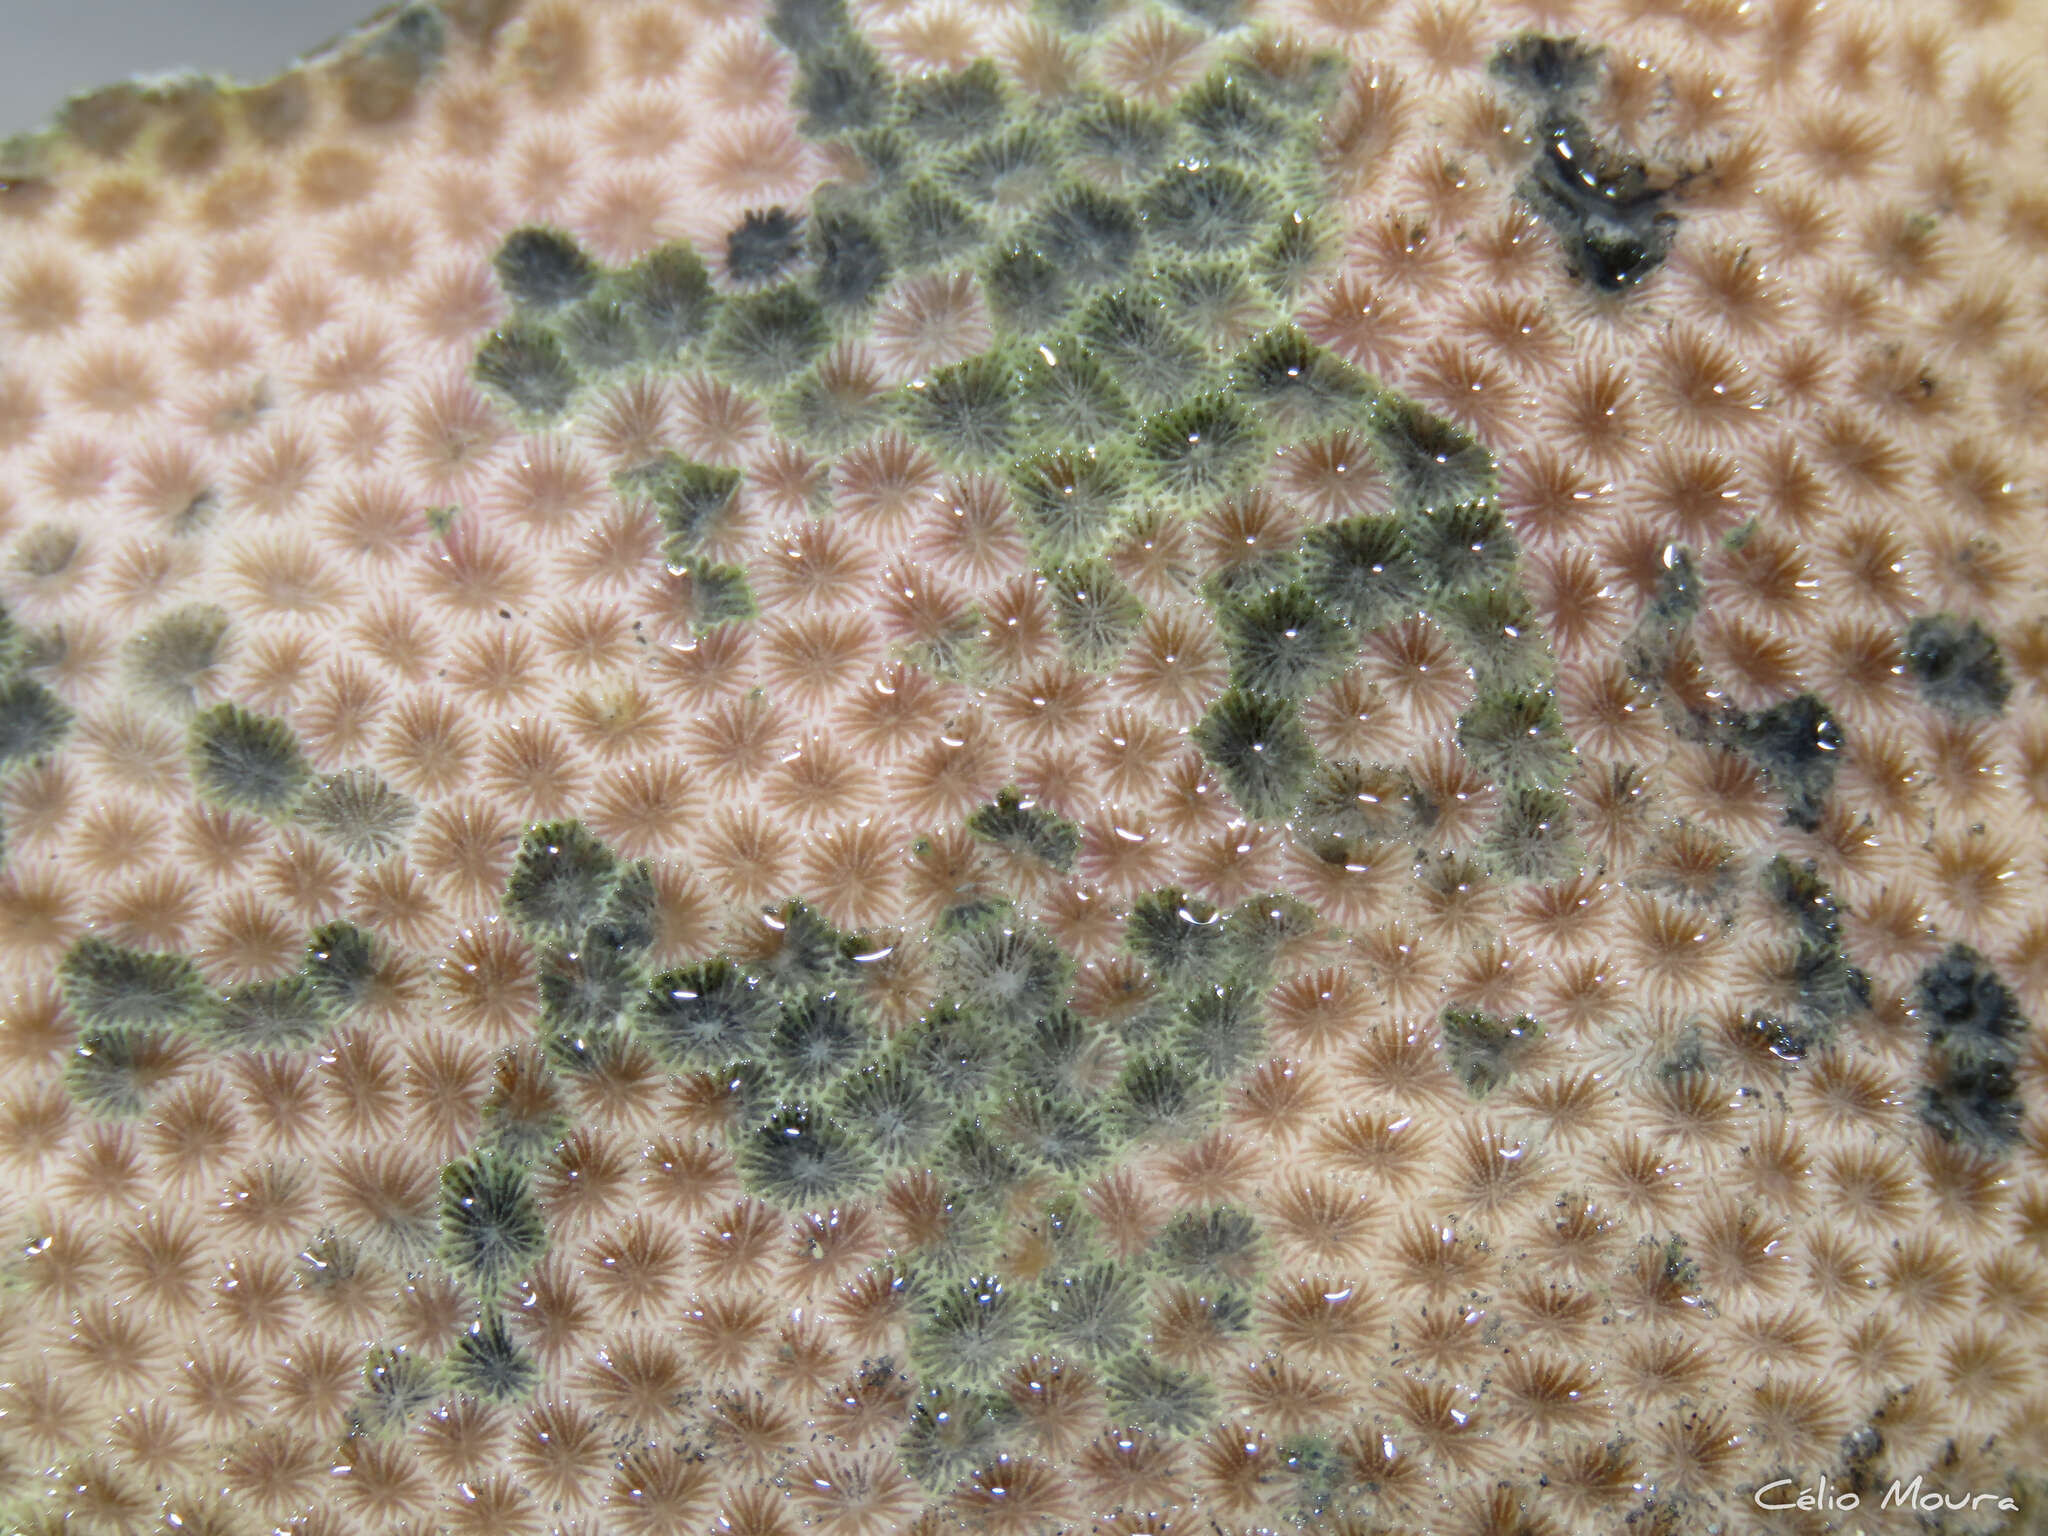 Image of Brazilian Starlet Coral